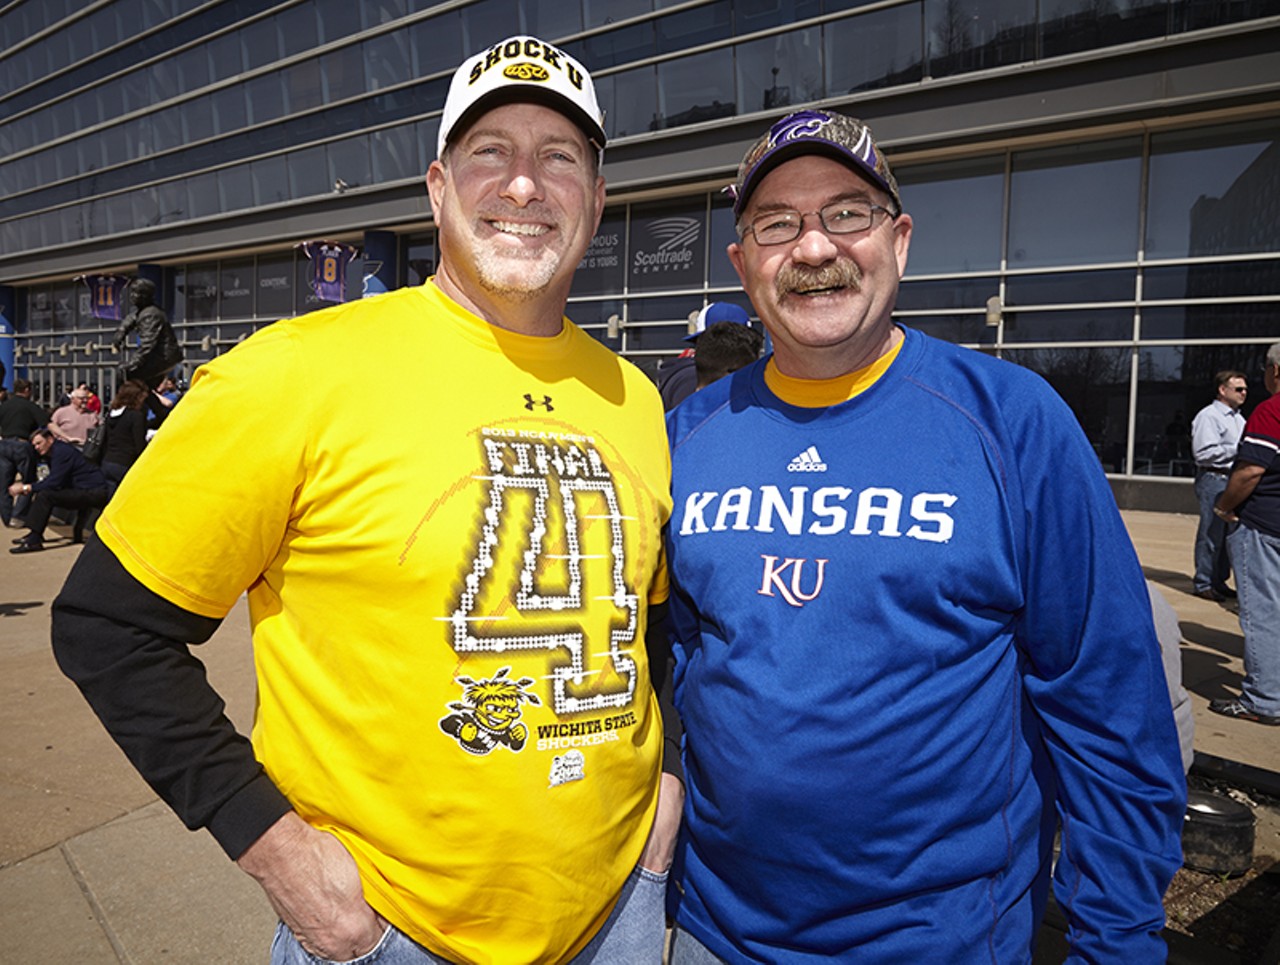 NCAA March Madness Fans at Scottrade Center